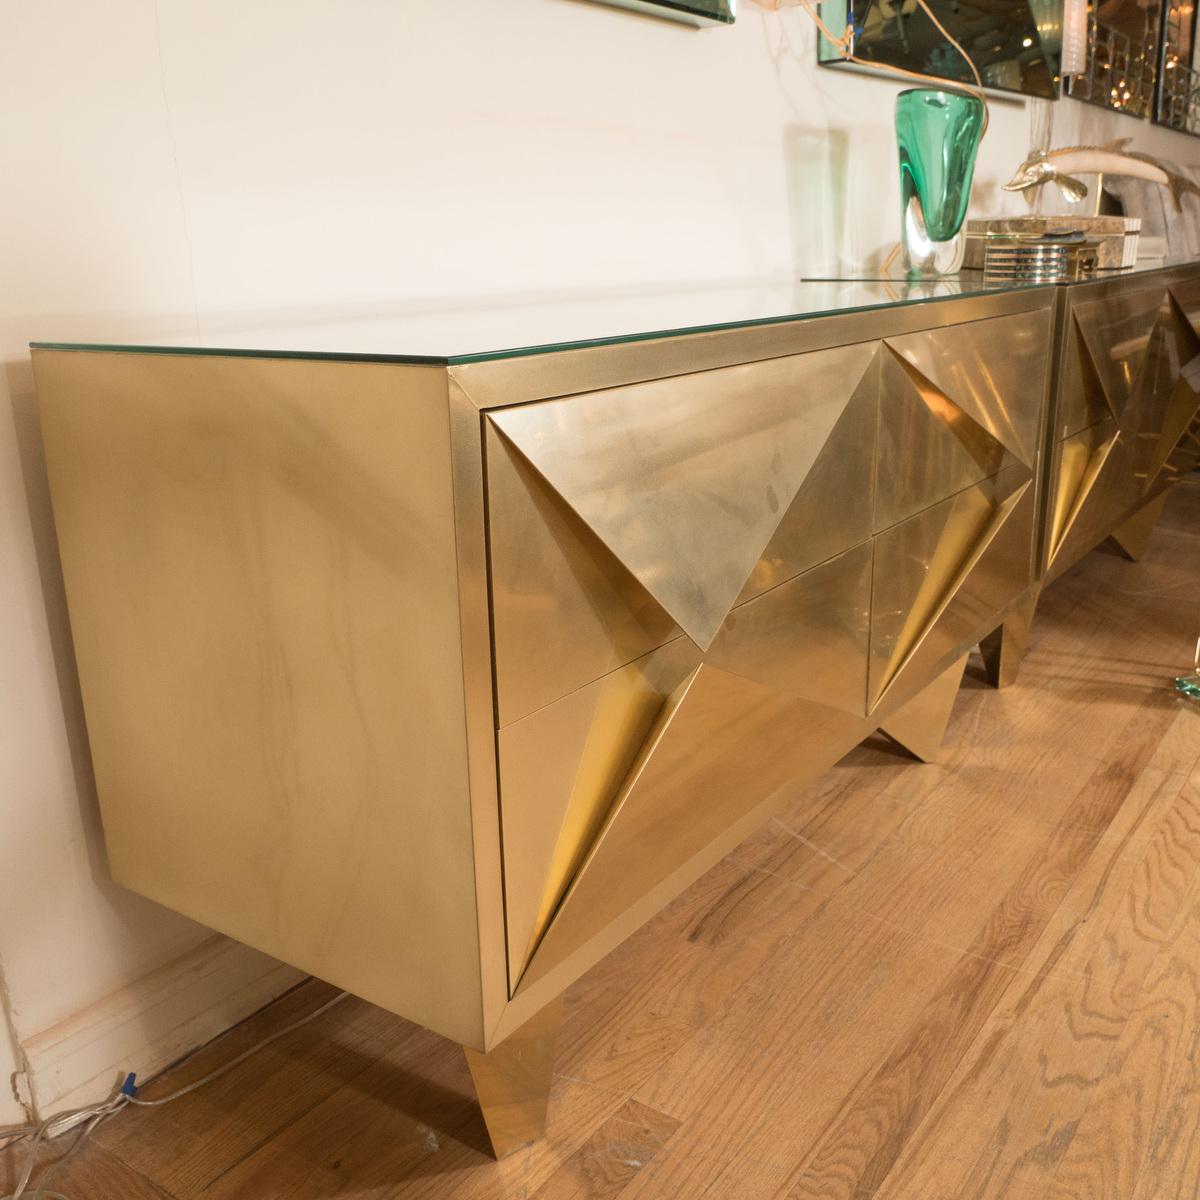 Pair of brass cabinets with diamond form front details and pyramidal legs.